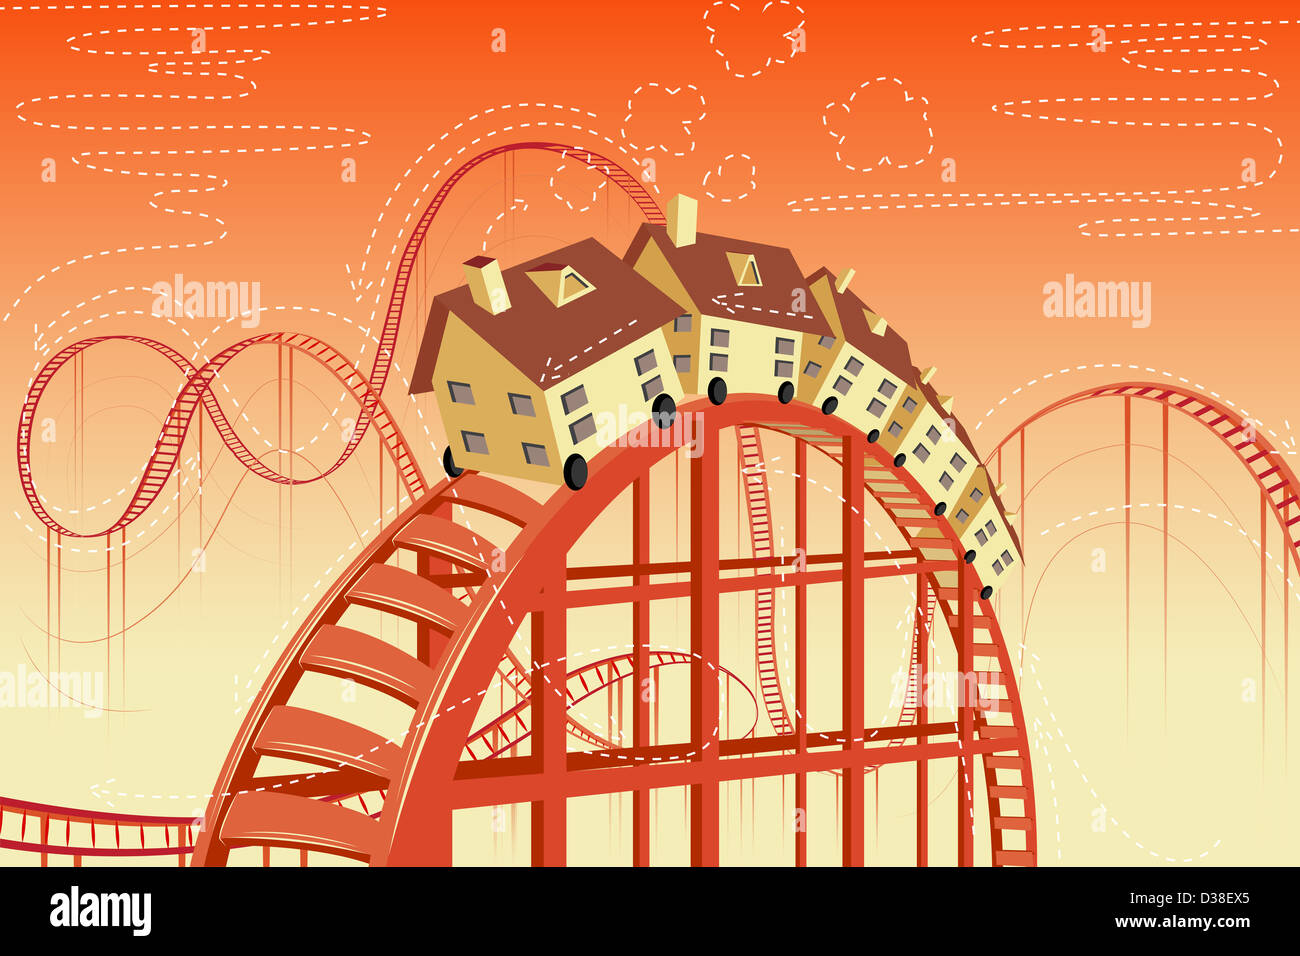 Illustrative image of houses on rollercoaster representing real estate ups and downs Stock Photo